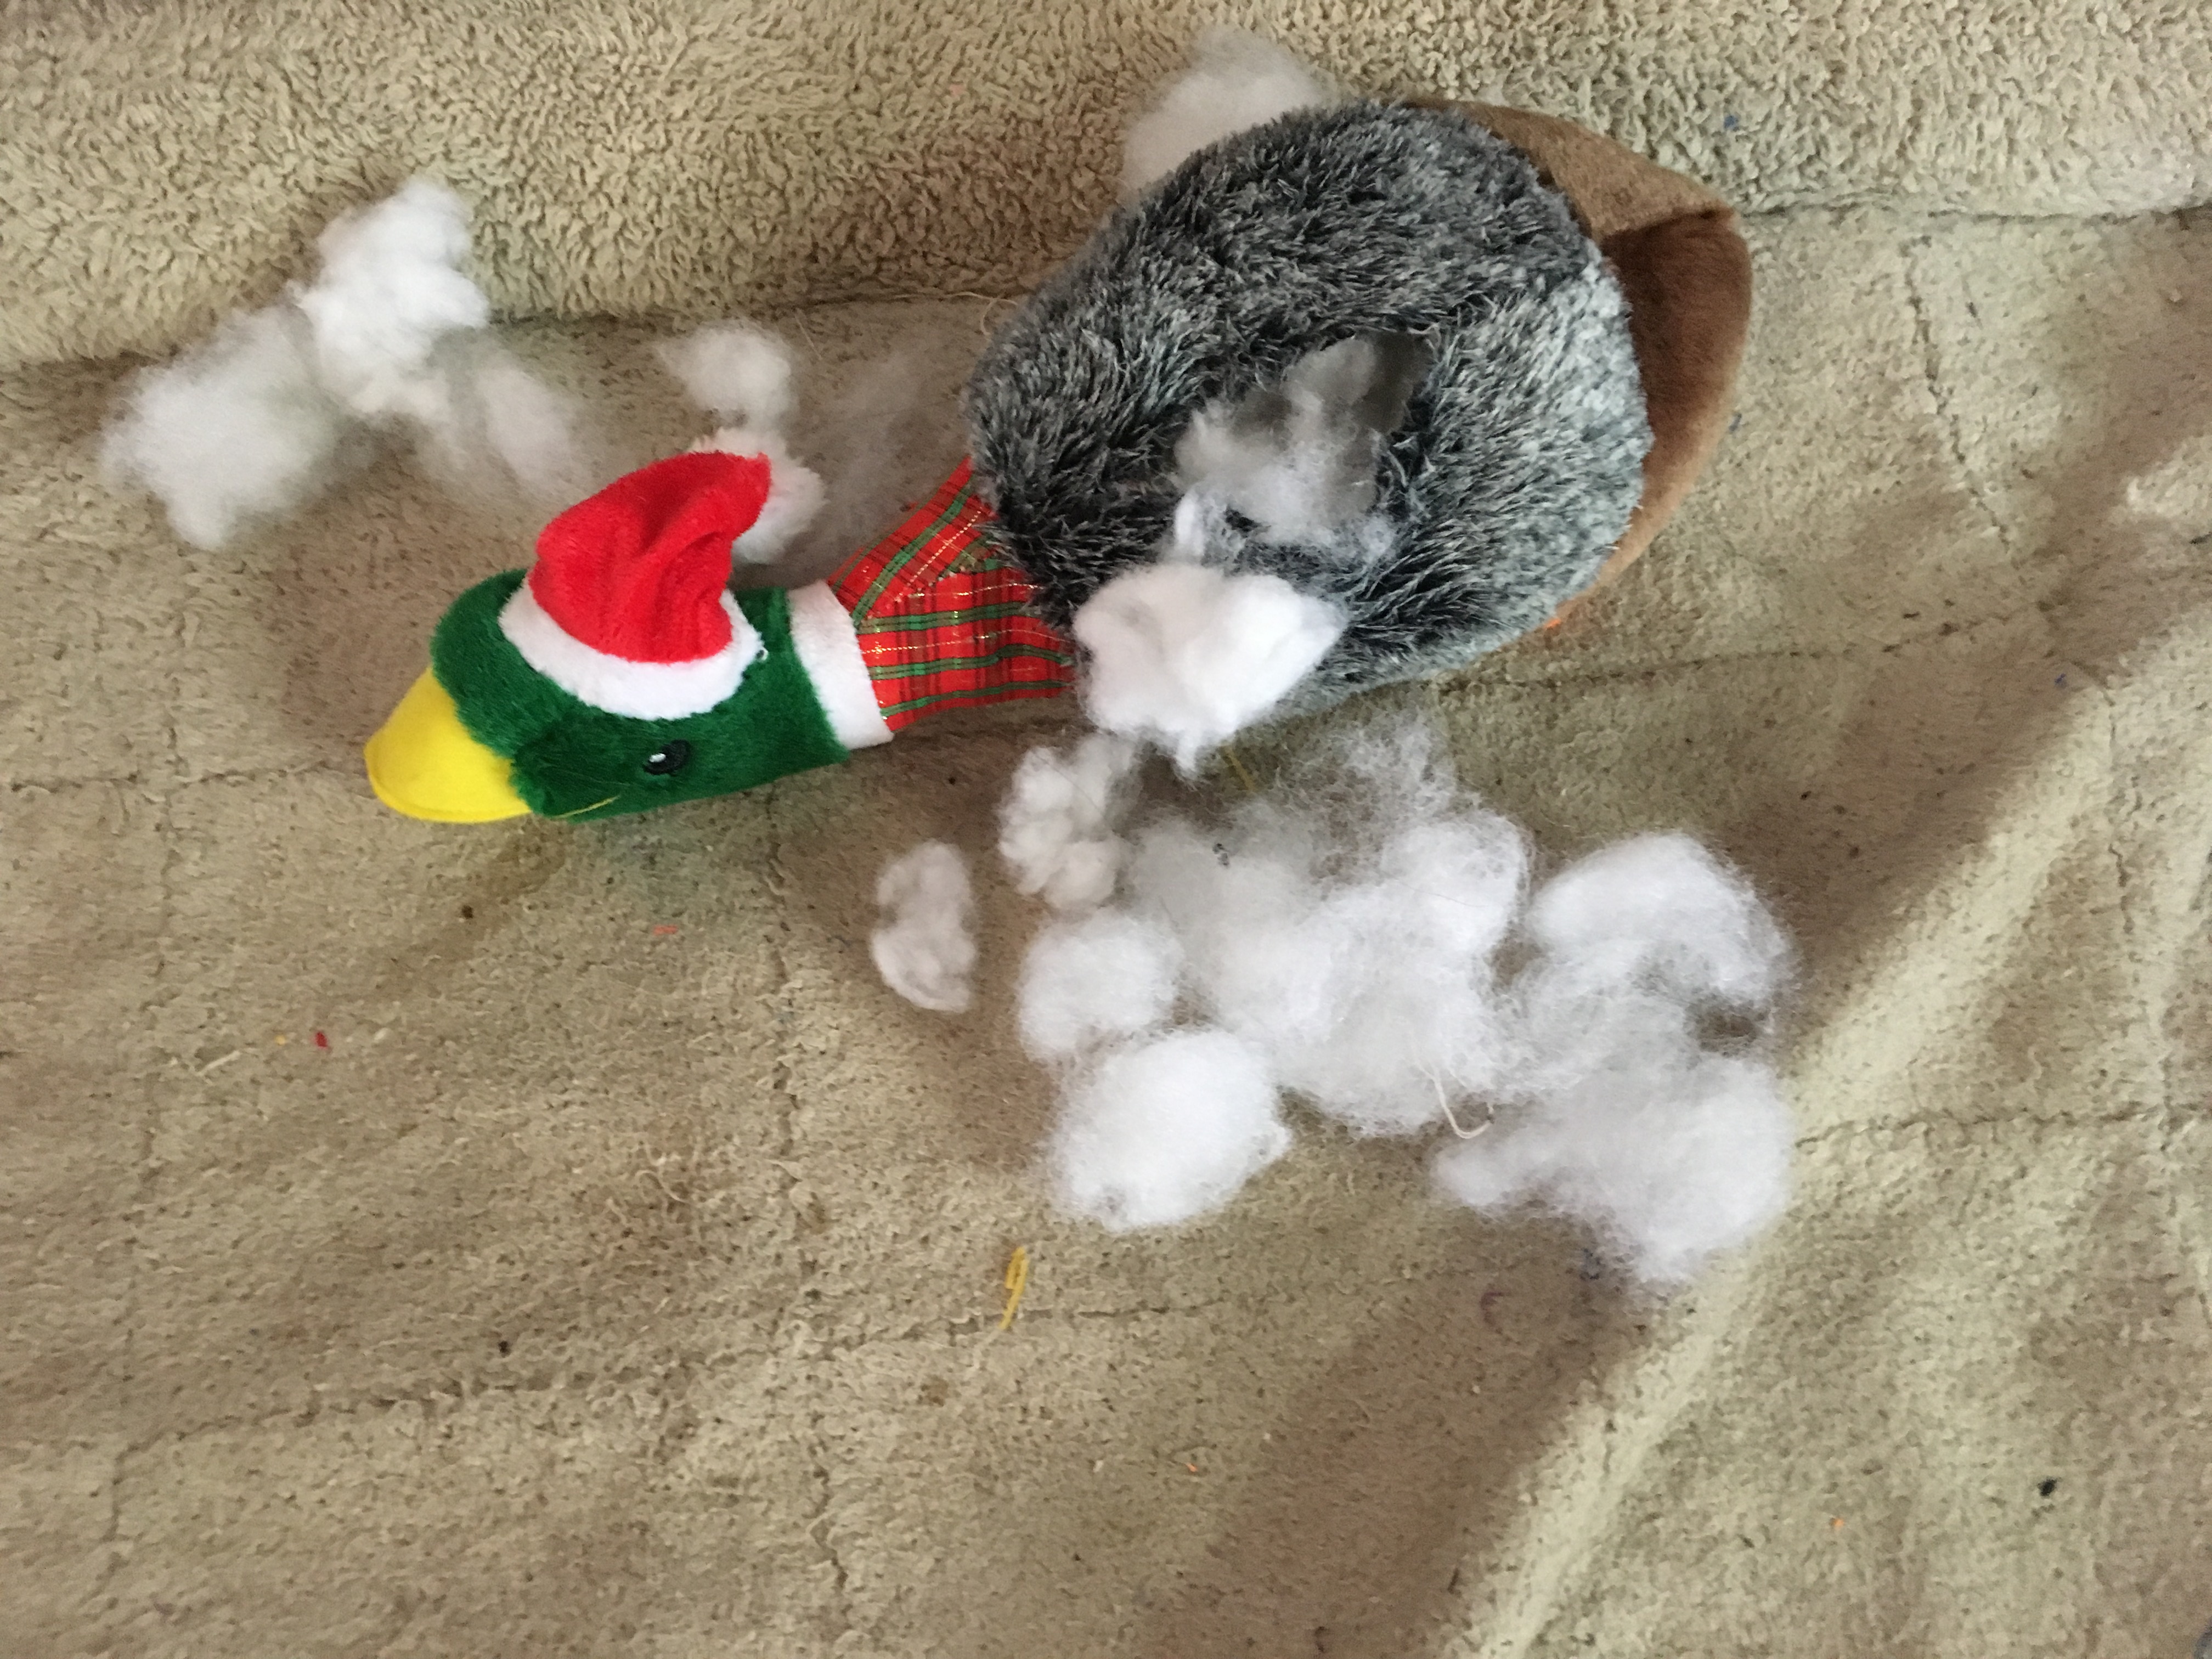 Time to toy destruction: 5 minutes 12 seconds photo